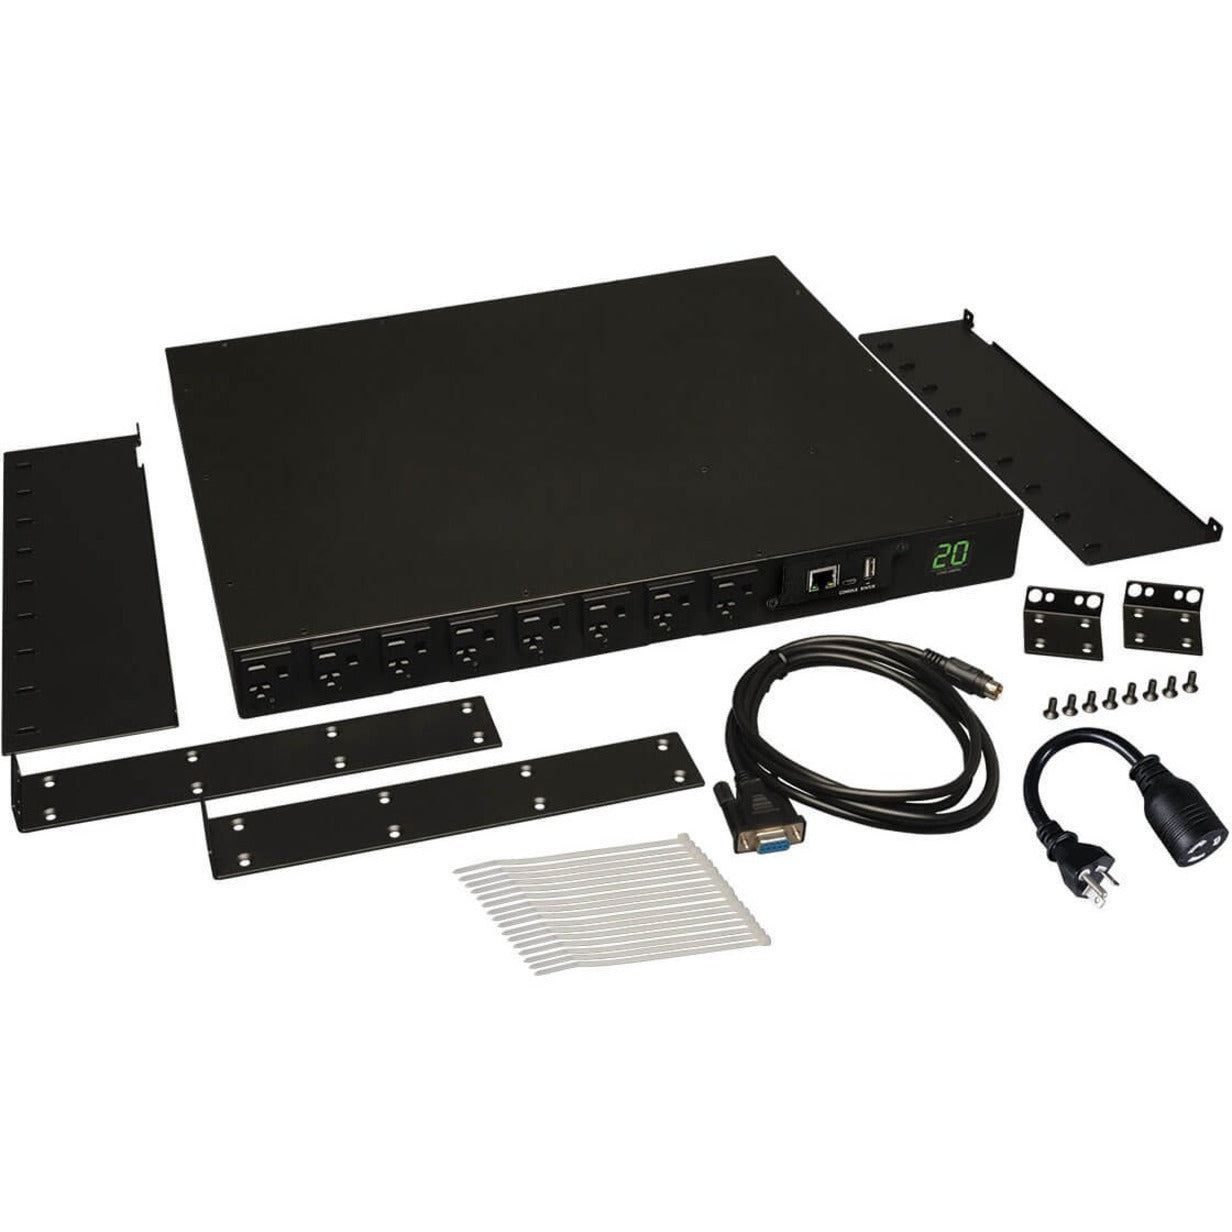 Tripp Lite PDUMH20NET Switched Metered PDU, 16-Outlets, 120V AC, Rack-mountable